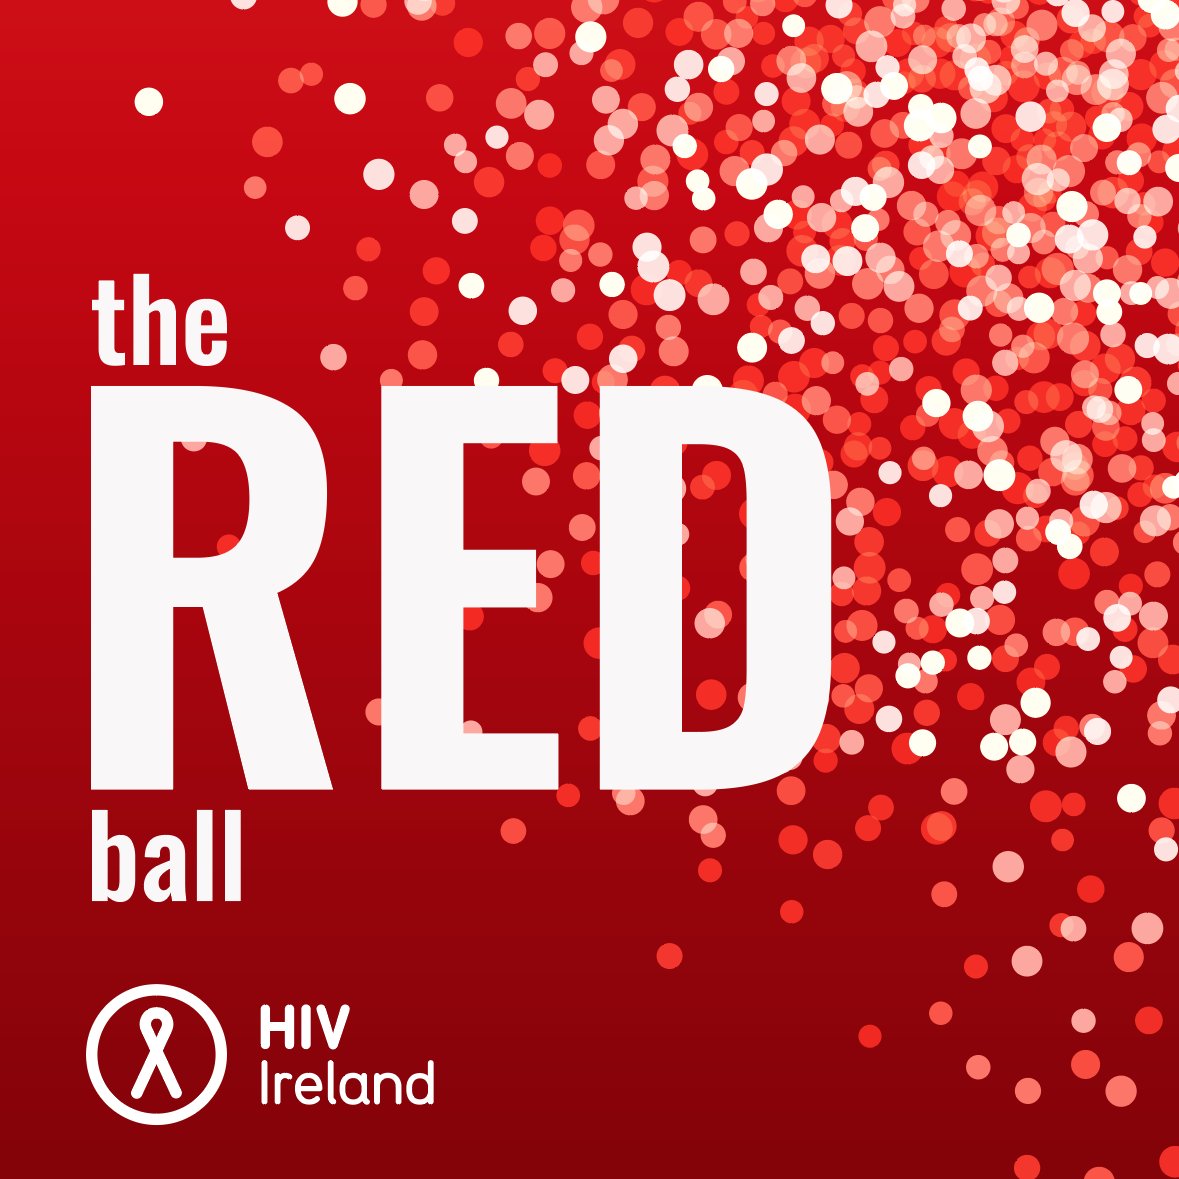 1/2 We're looking forward to welcoming a host of sponsors and guests to @homeofguinness tomorrow evening for the annual #REDBall, with entertainment by @musicbyloah and special guest and Ambassador for the #GlowRED campaign @BexDeHavilland. #GLOWRED4WAD